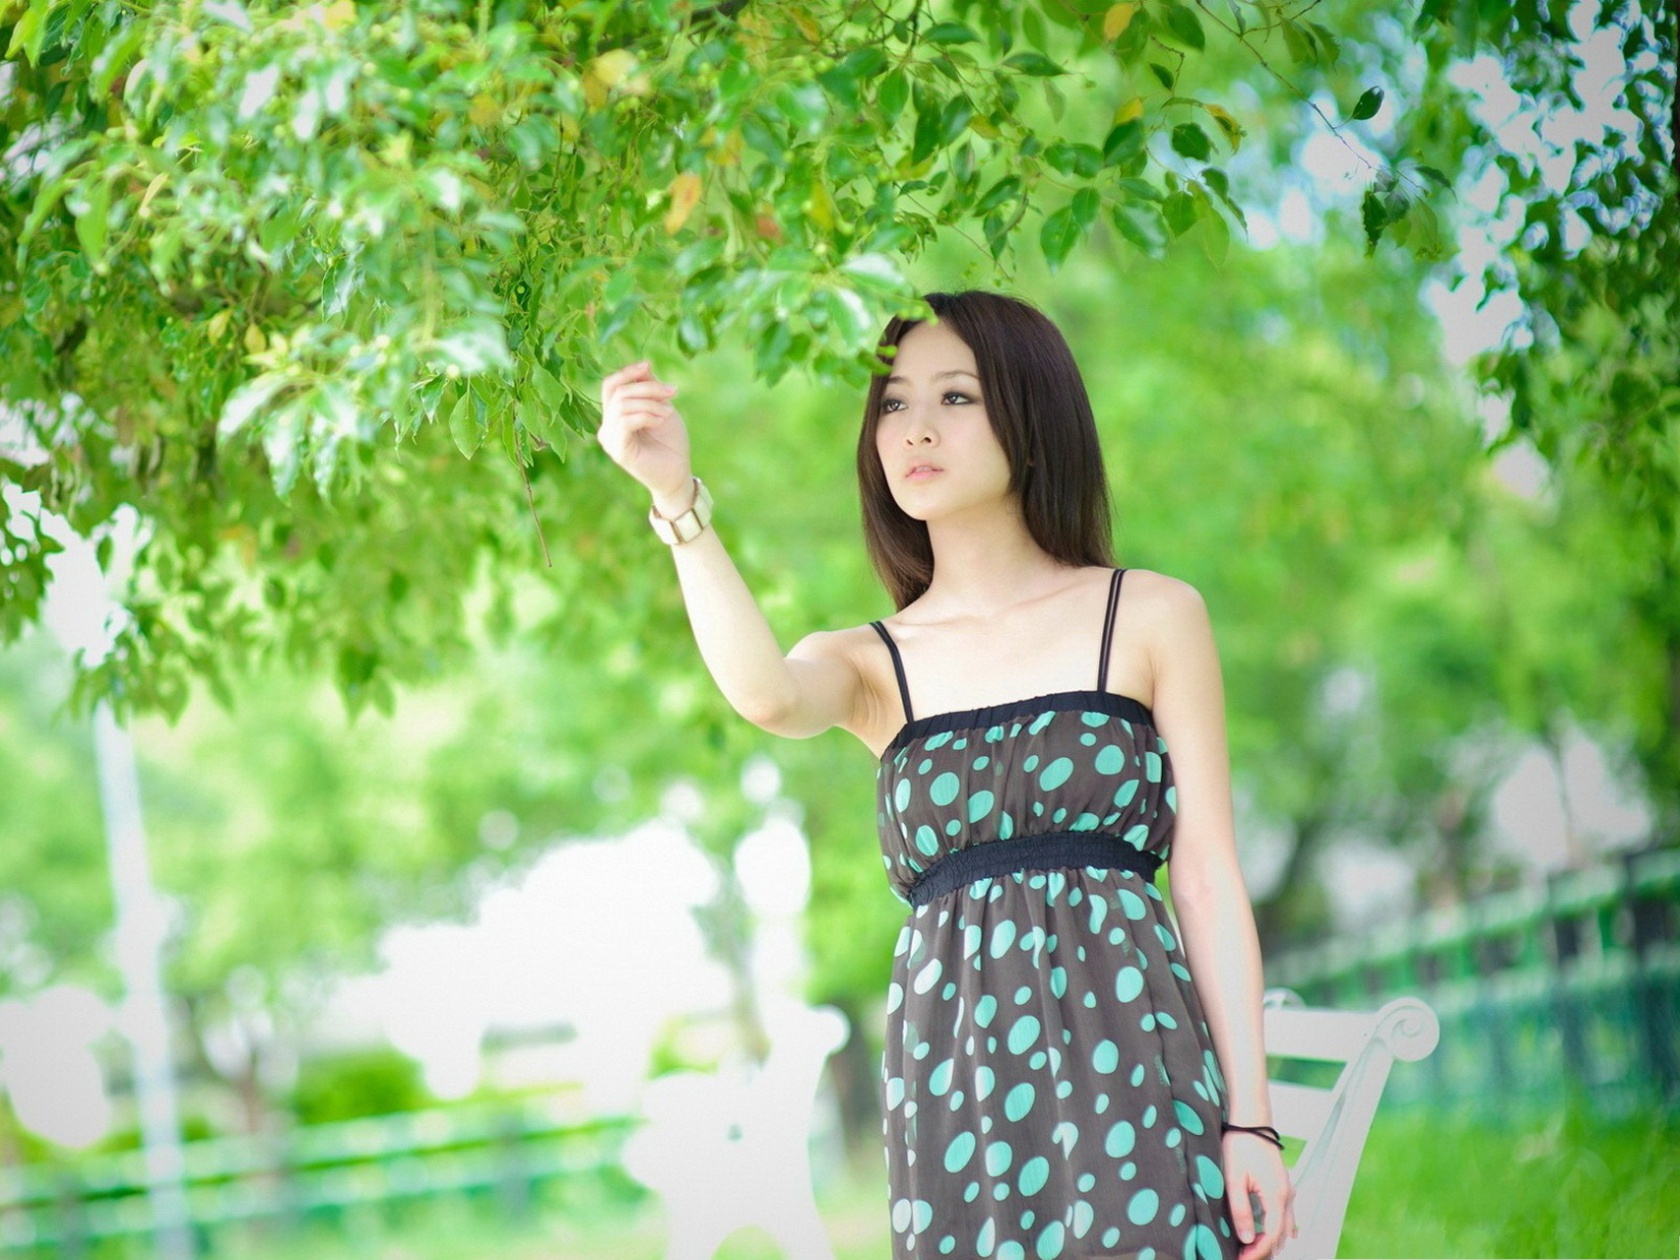 nice girl wallpaper,people in nature,green,nature,beauty,grass